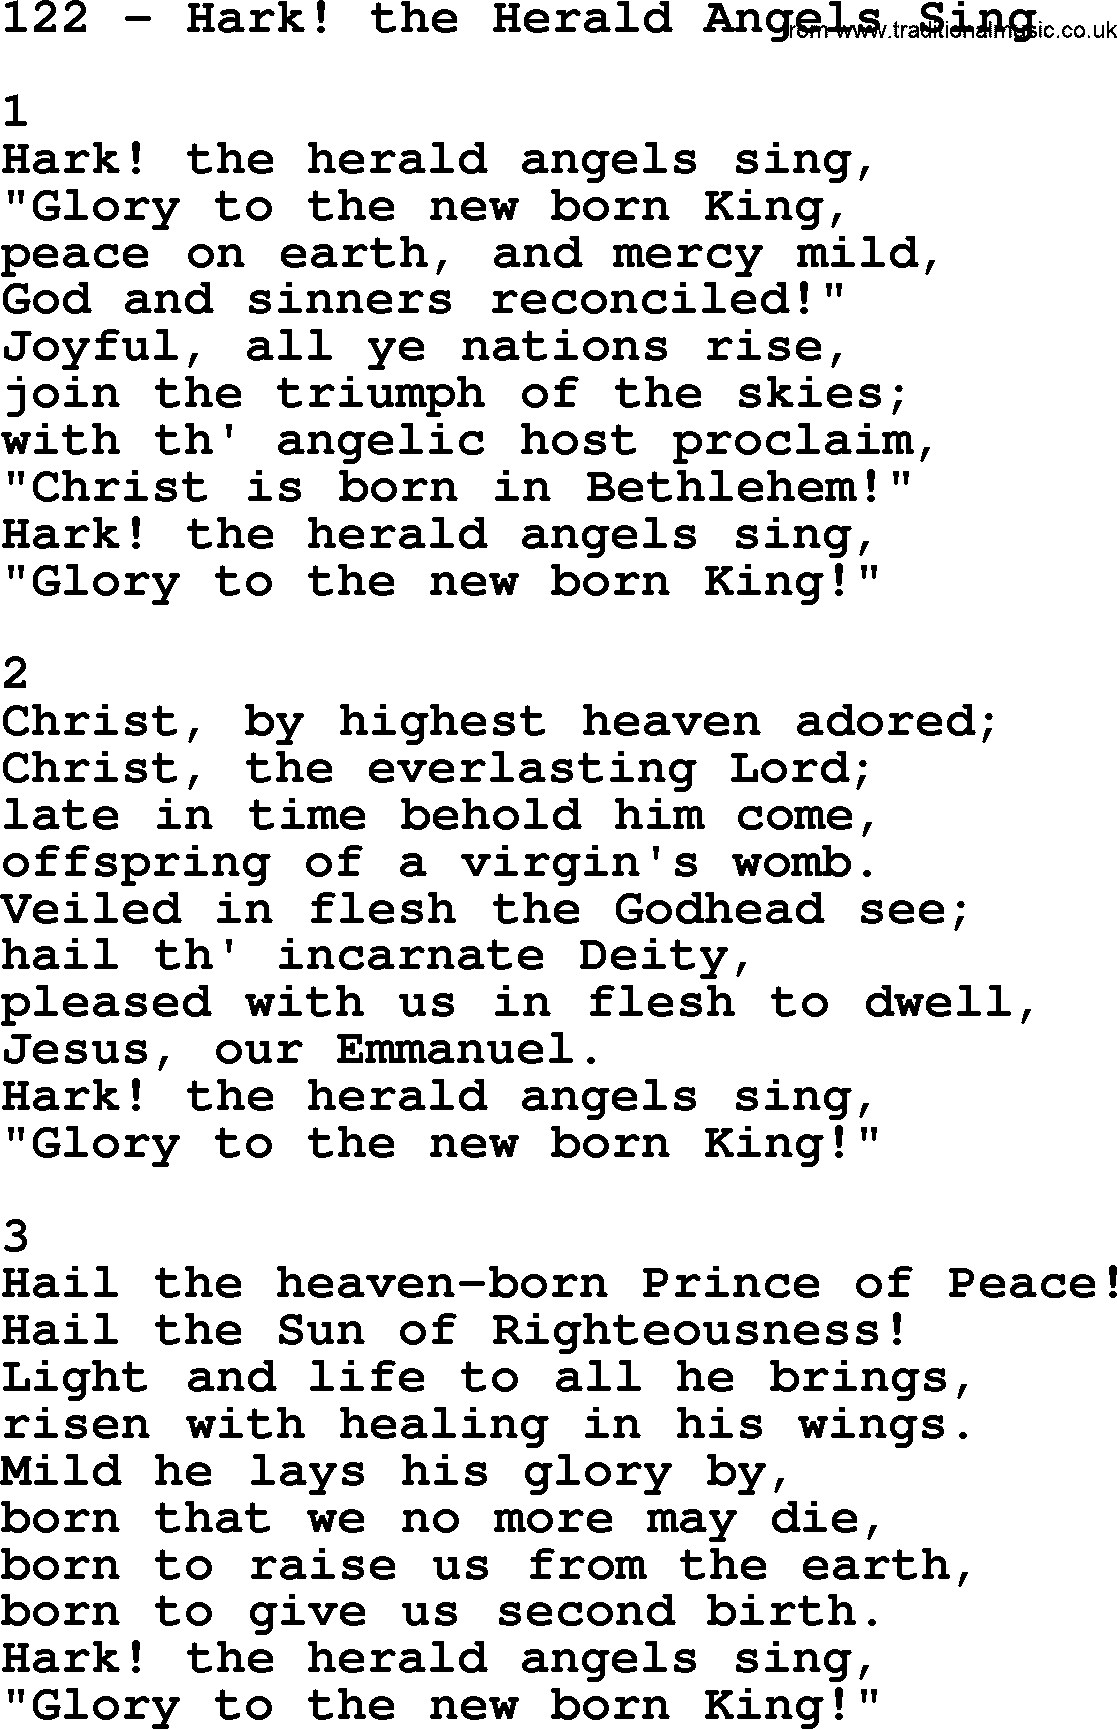 Complete Adventis Hymnal, title: 122-Hark! The Herald Angels Sing, with lyrics, midi, mp3, powerpoints(PPT) and PDF,